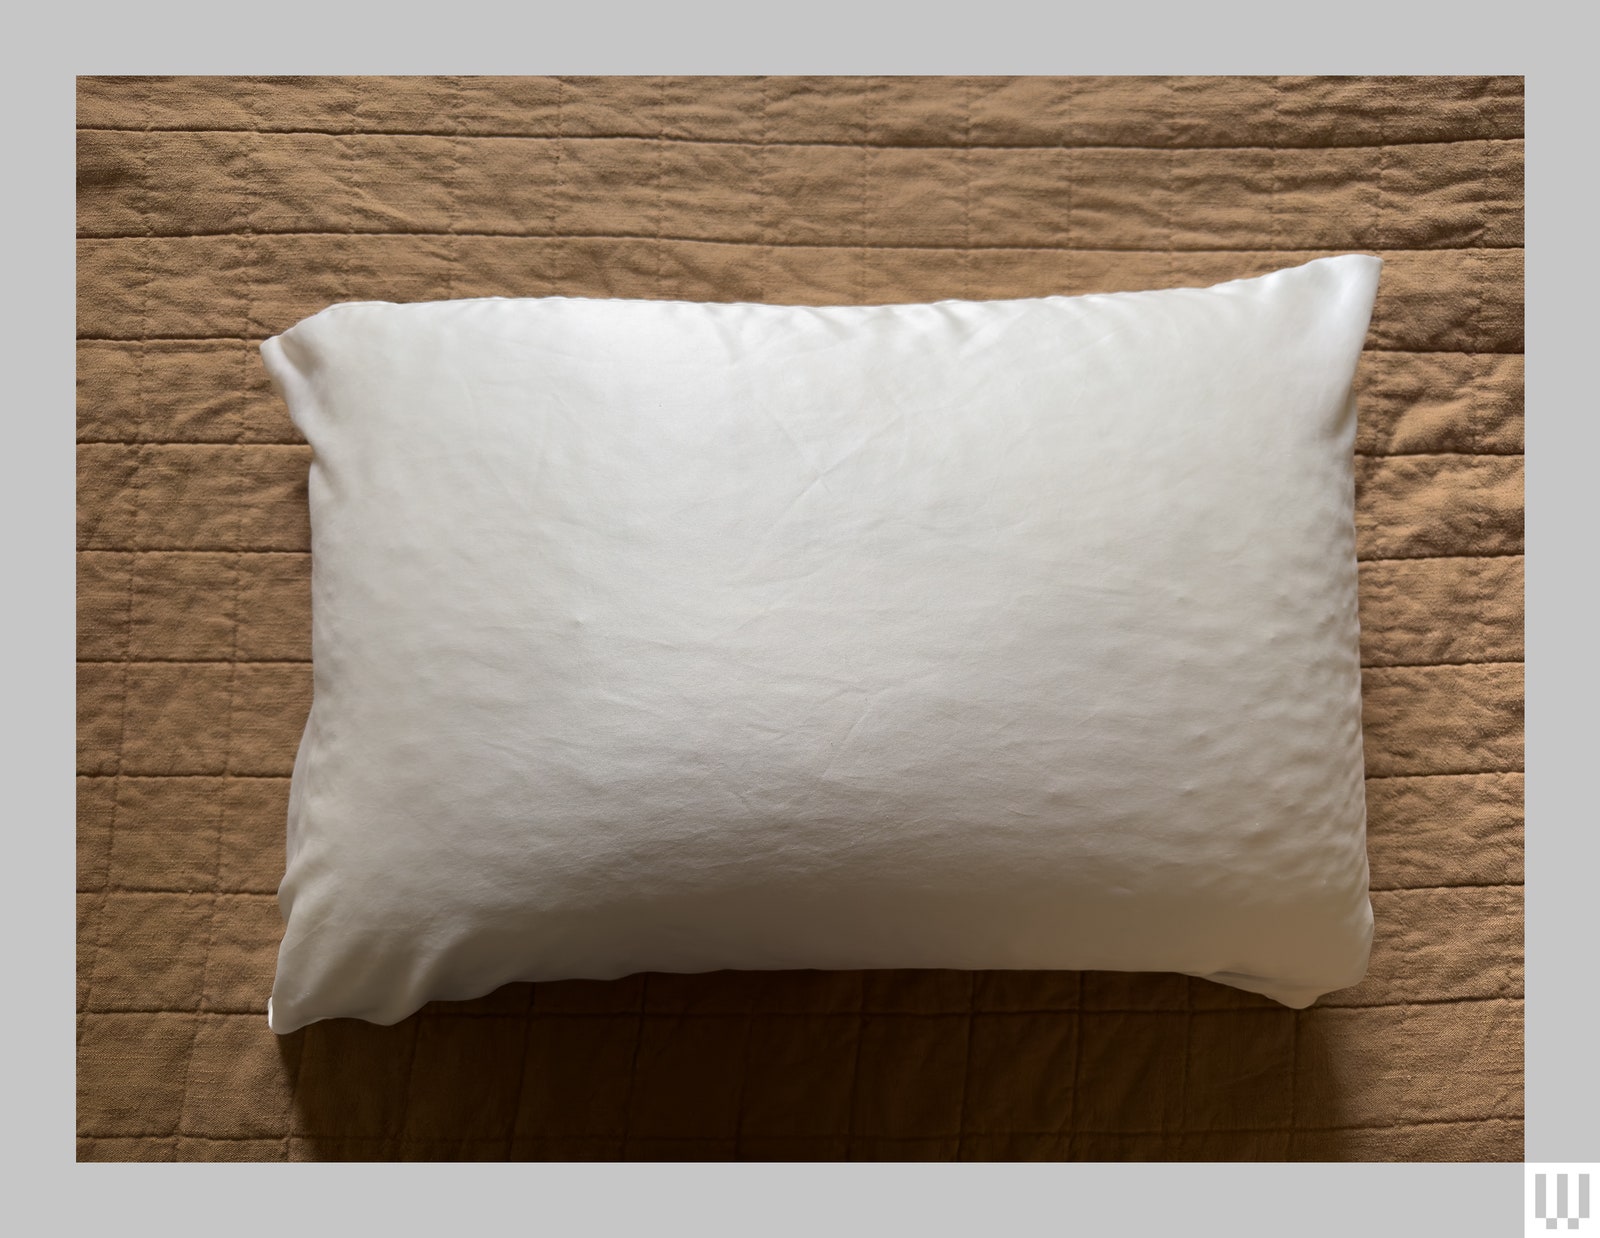 Overhead view of a pillow with a white silk cover on top of a beige duvet